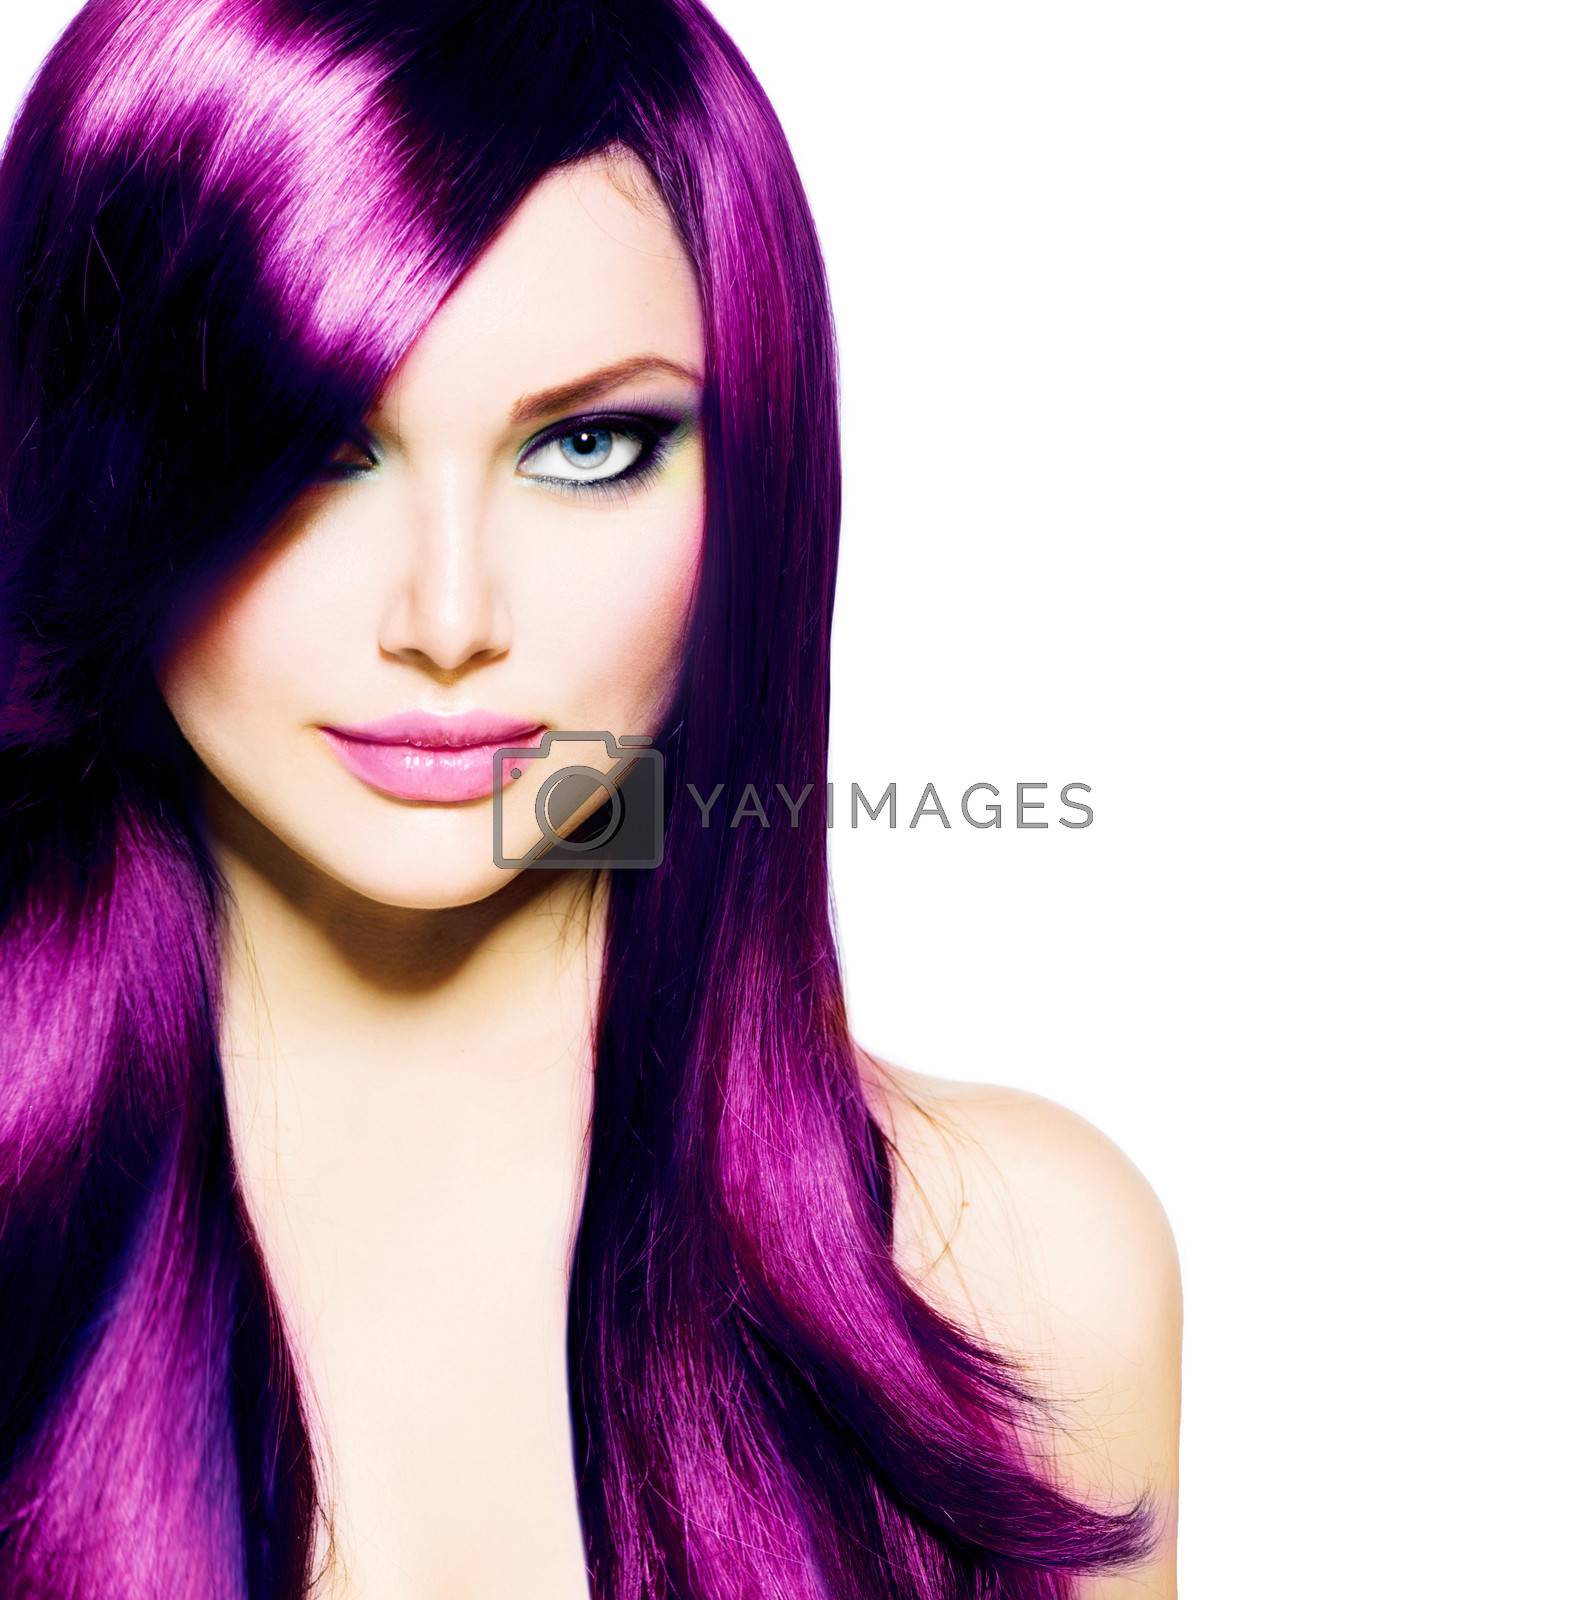 Royalty free image of Beautiful Girl with Healthy Long Purple Hair and Blue Eyes by SubbotinaA